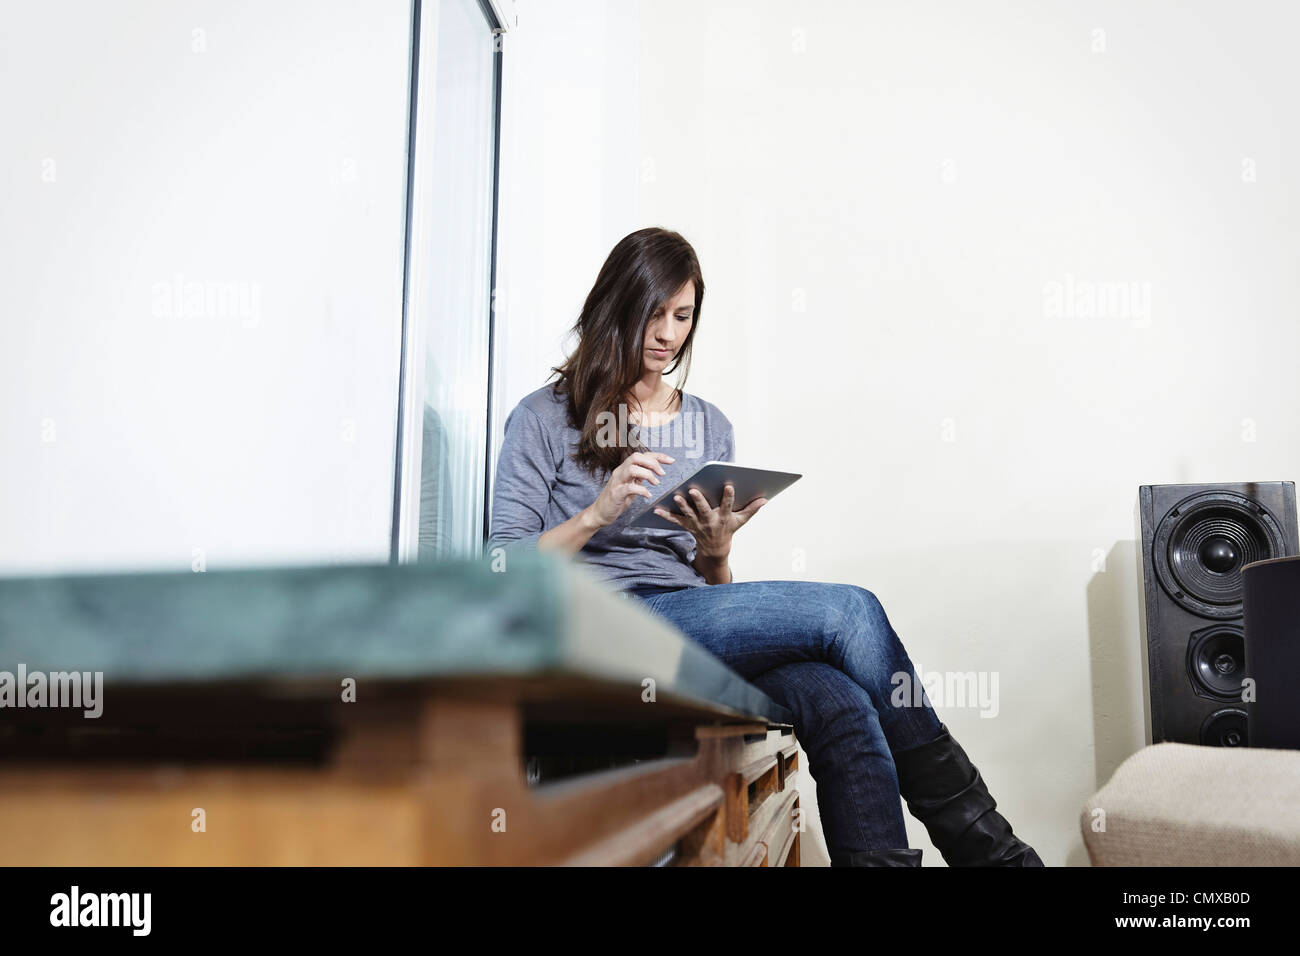 Germany, Cologne, Mid adult woman using digital tablet Stock Photo